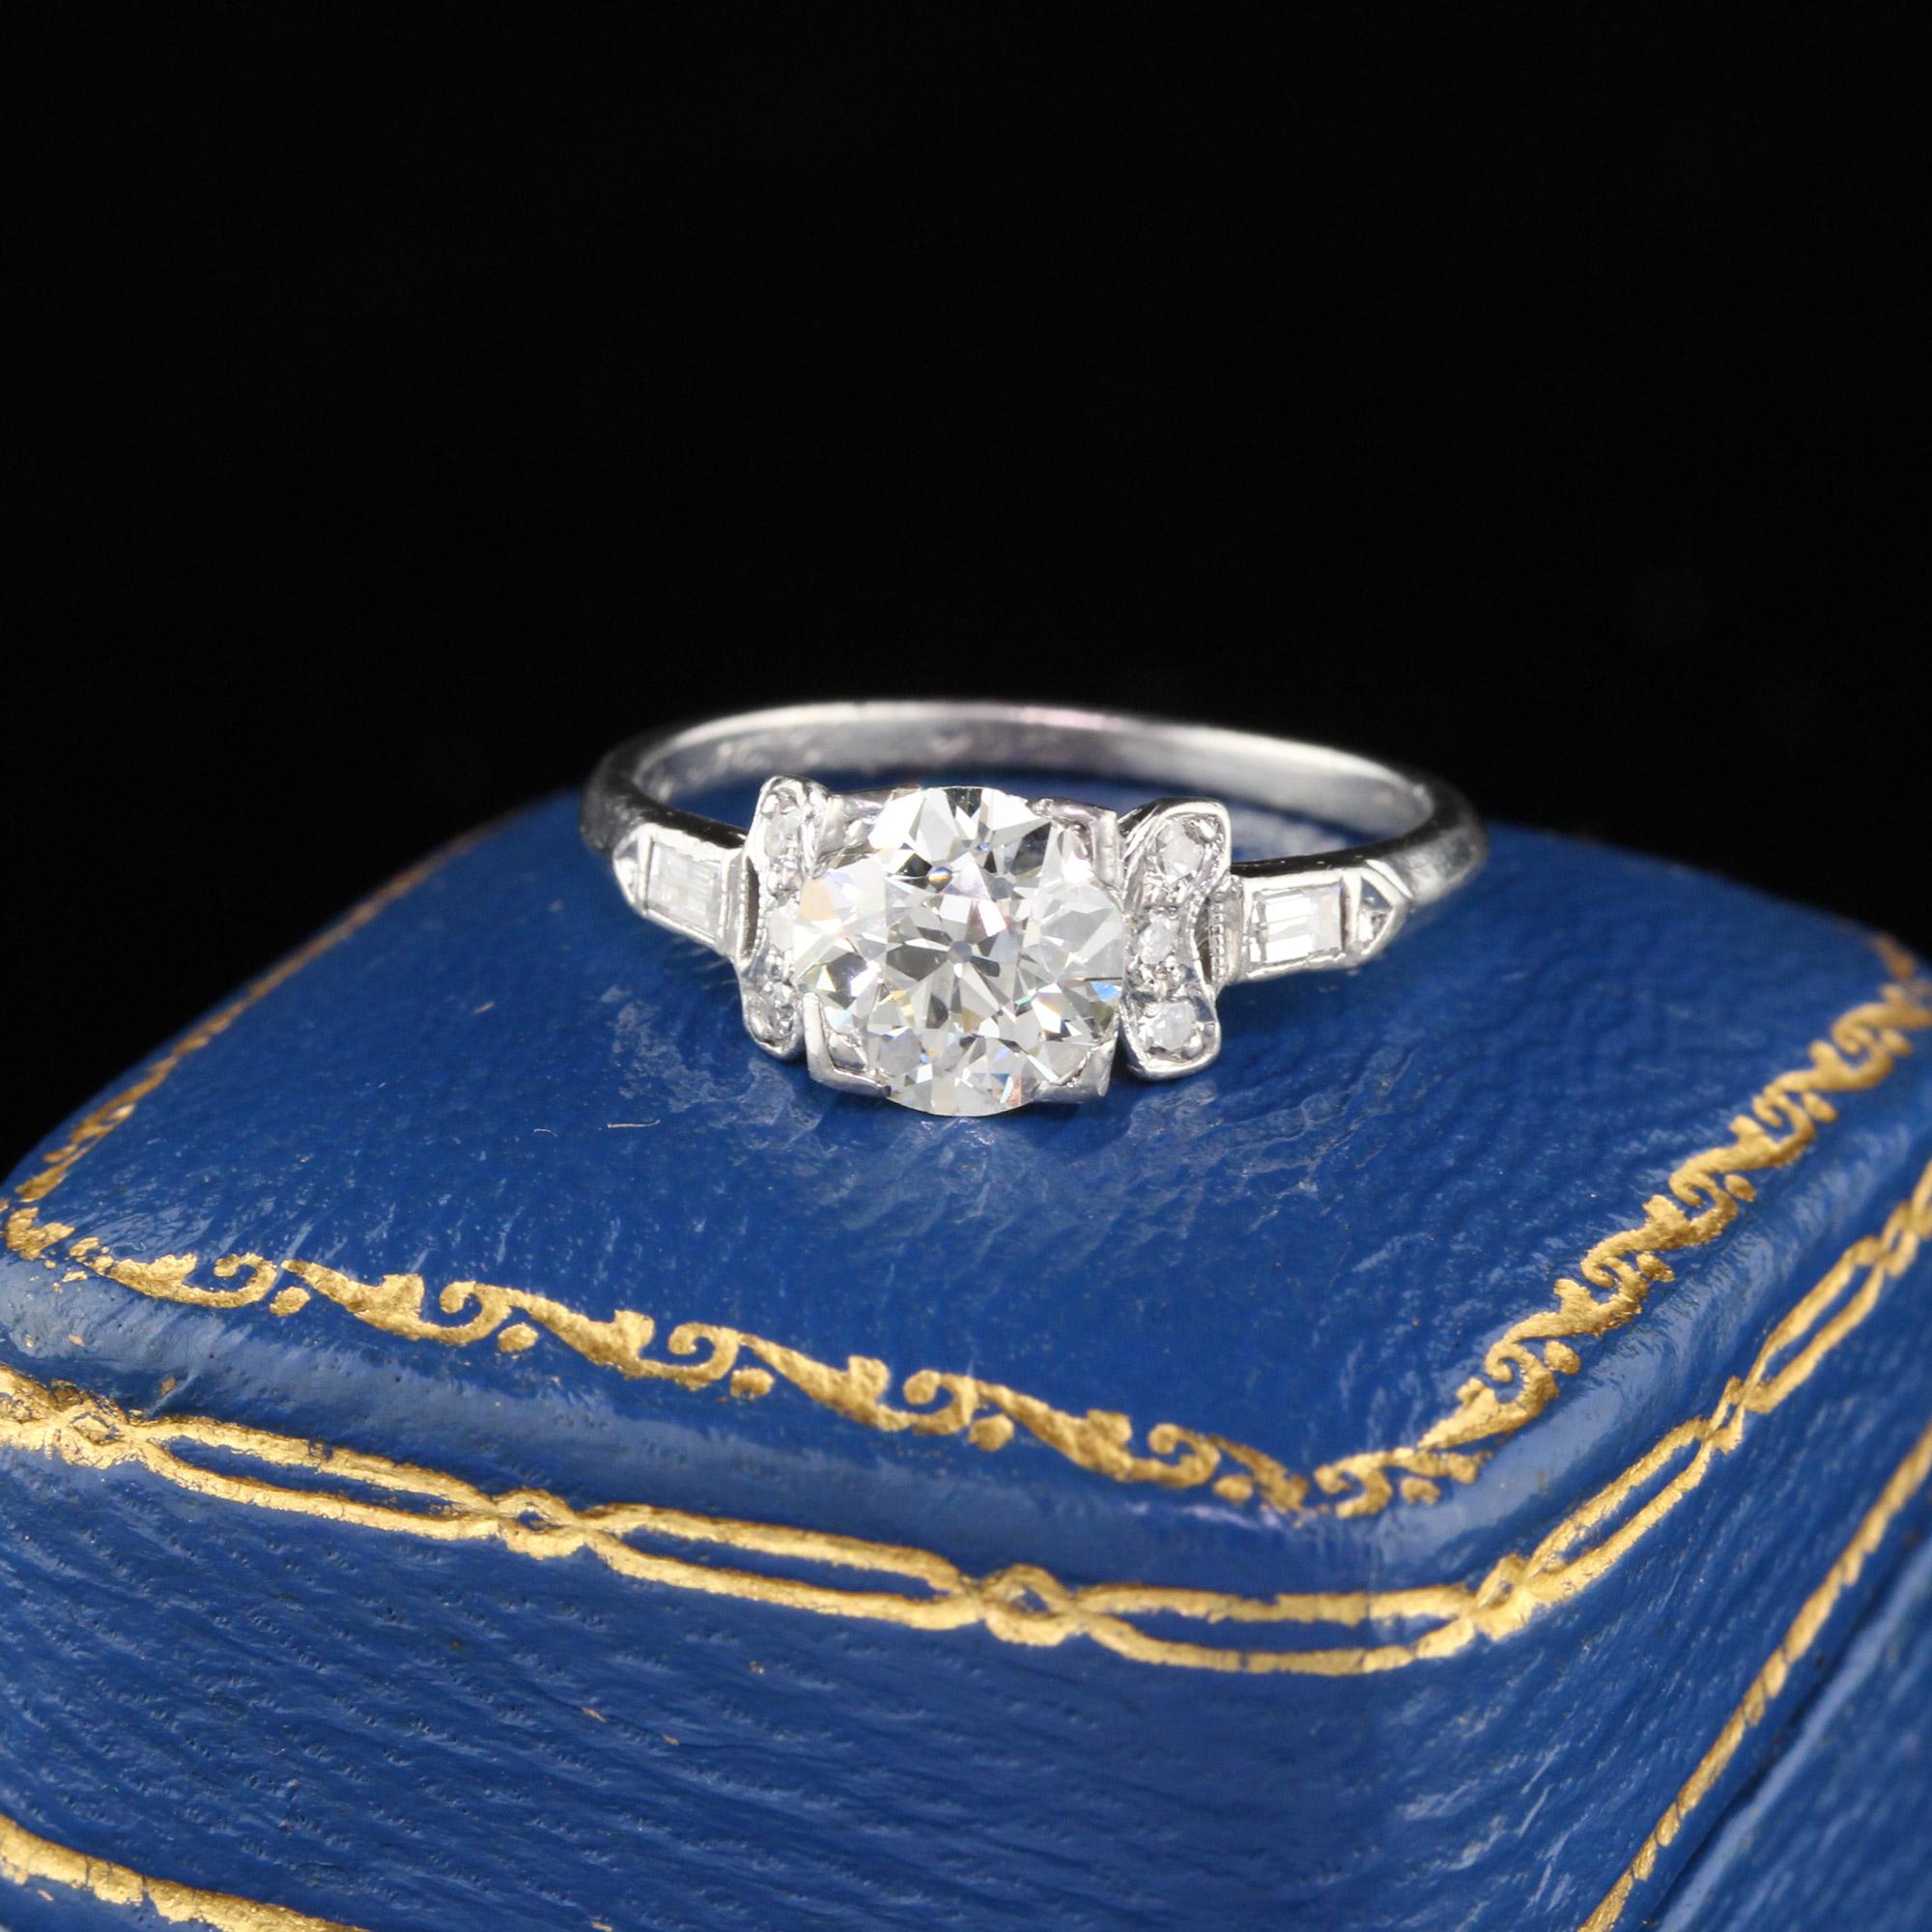 Gorgeous Art Deco Engagement Ring in platinum with an old european cut diamond in the center in a stunning mounting. 3 single cut diamonds & 1 baguette cut diamond are set on either side of the center.

#R0302

Metal: Platinum

Weight: 3.2